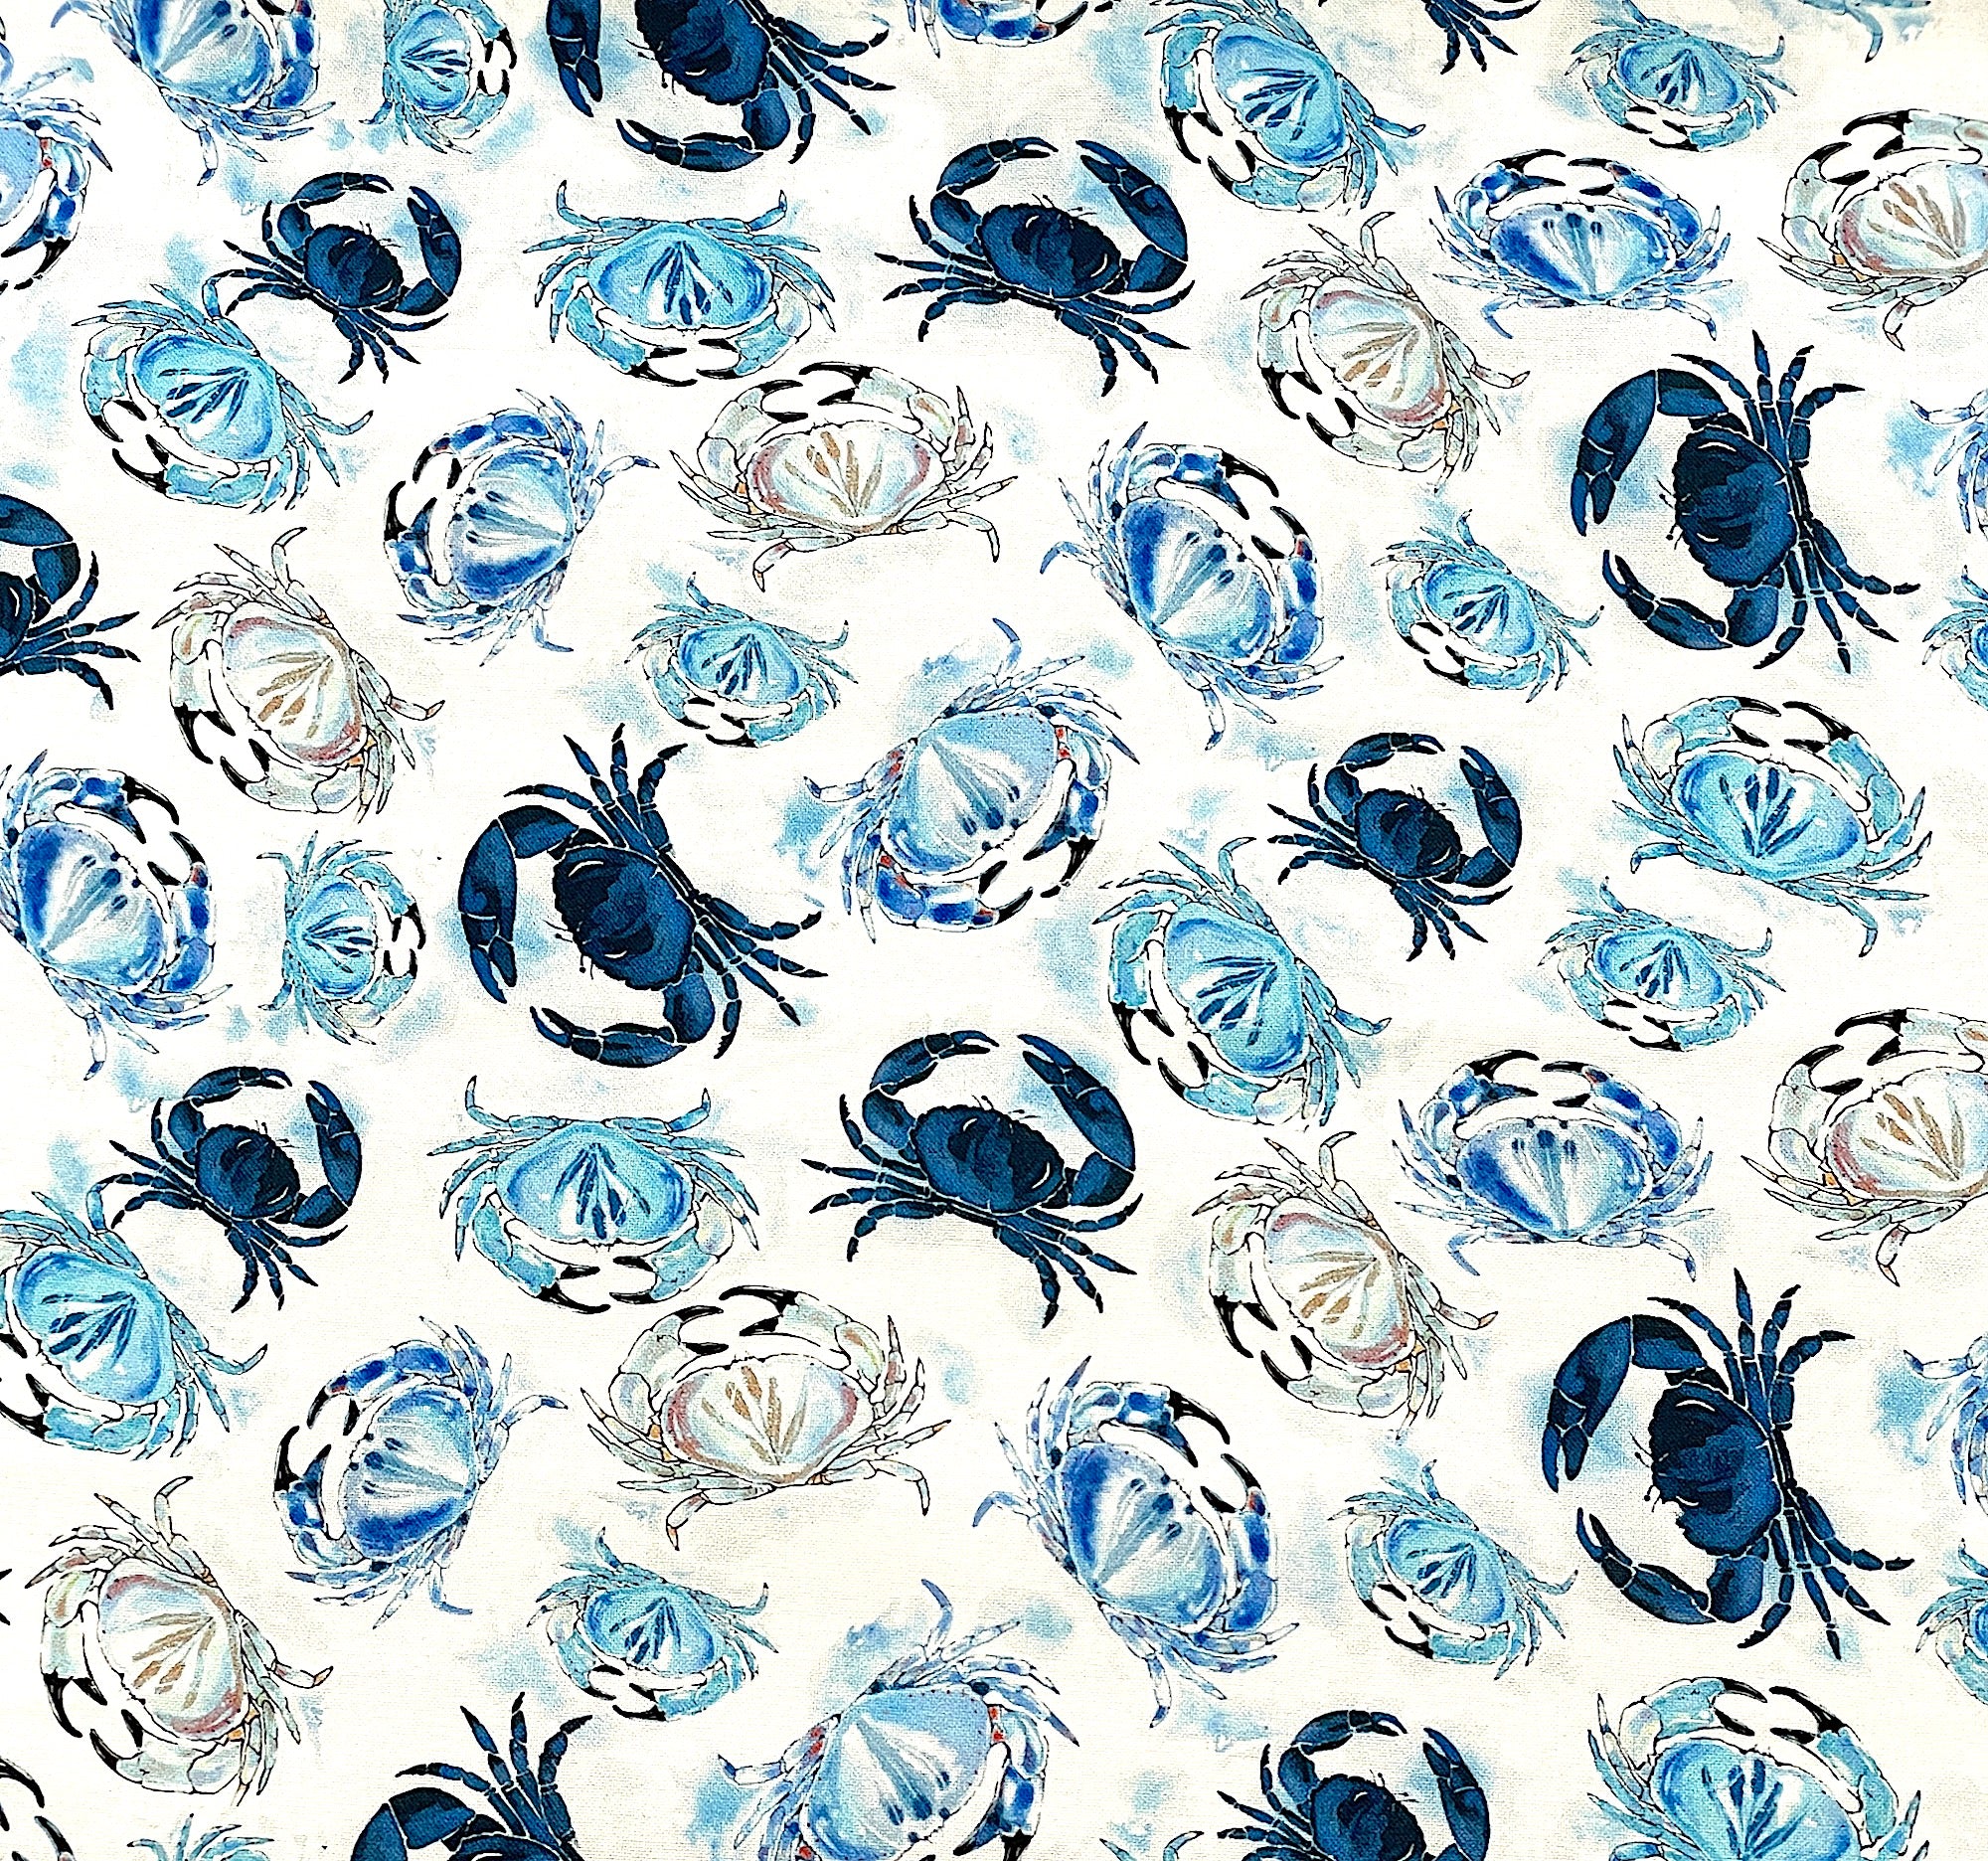 White cotton fabric covered with crabs in various shades of blue